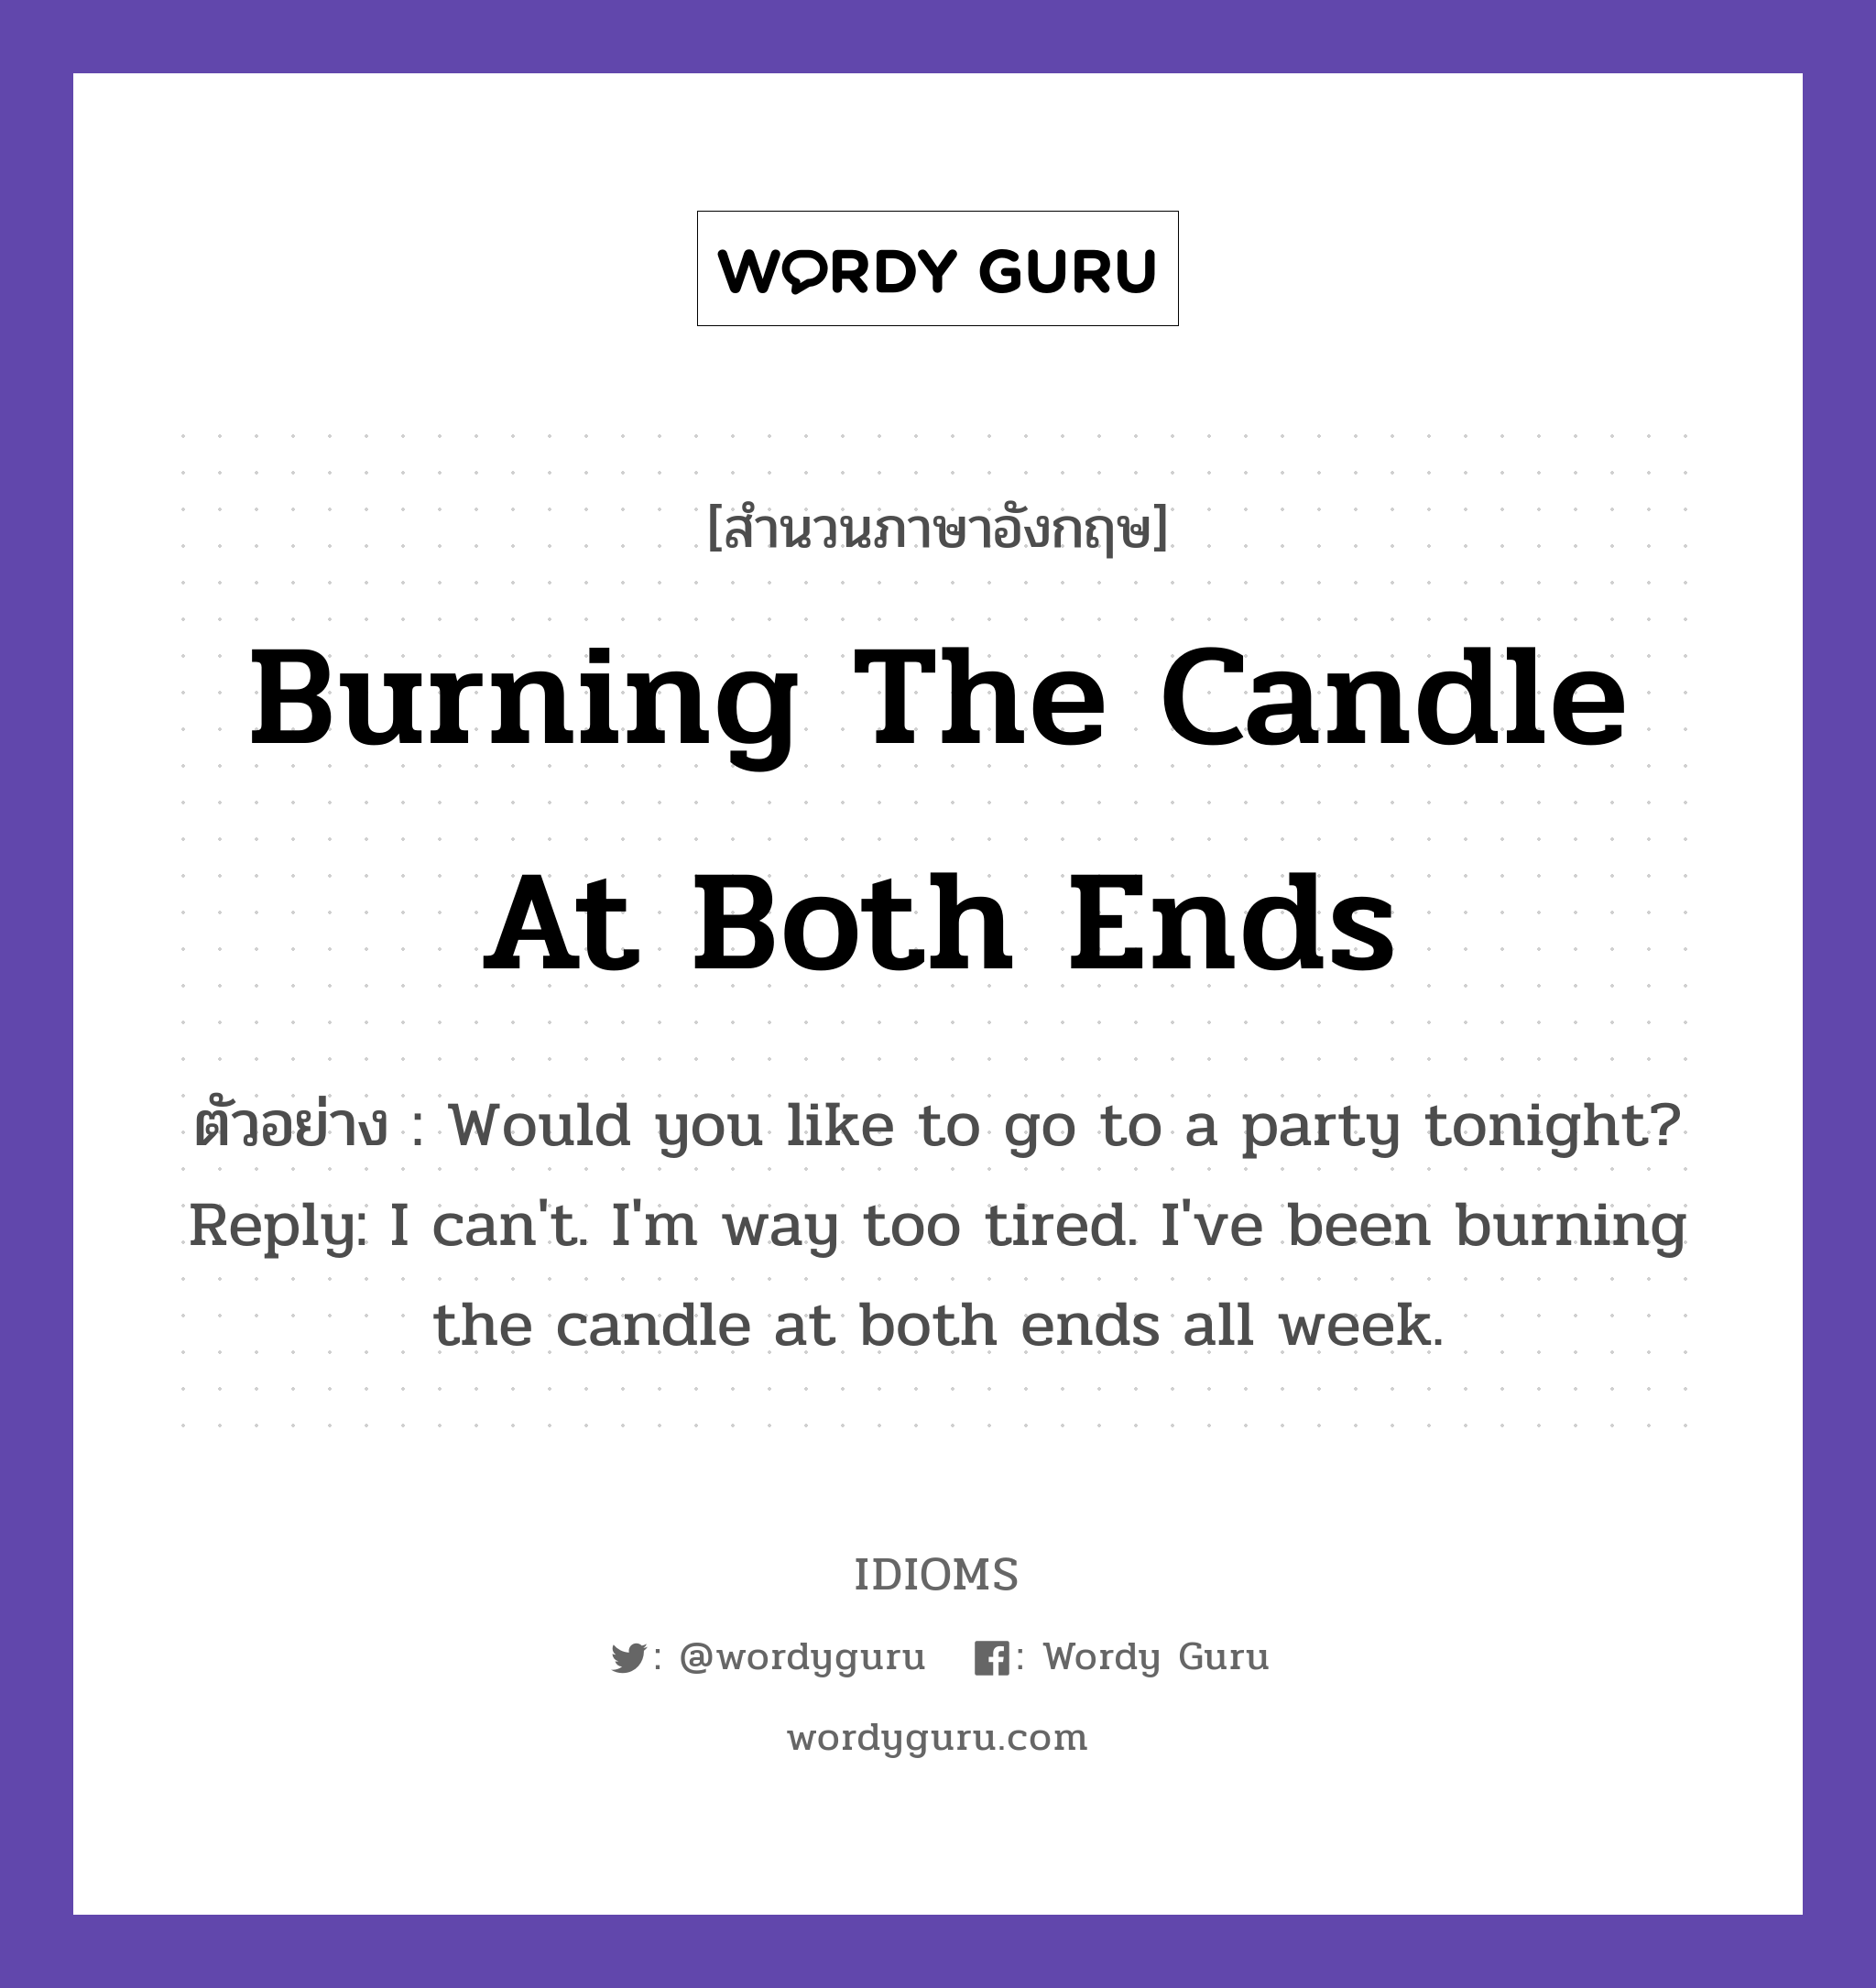 Burning The Candle At Both Ends แปลว่า?, สำนวนภาษาอังกฤษ Burning The Candle At Both Ends ตัวอย่าง Would you like to go to a party tonight? Reply: I can't. I'm way too tired. I've been burning the candle at both ends all week.